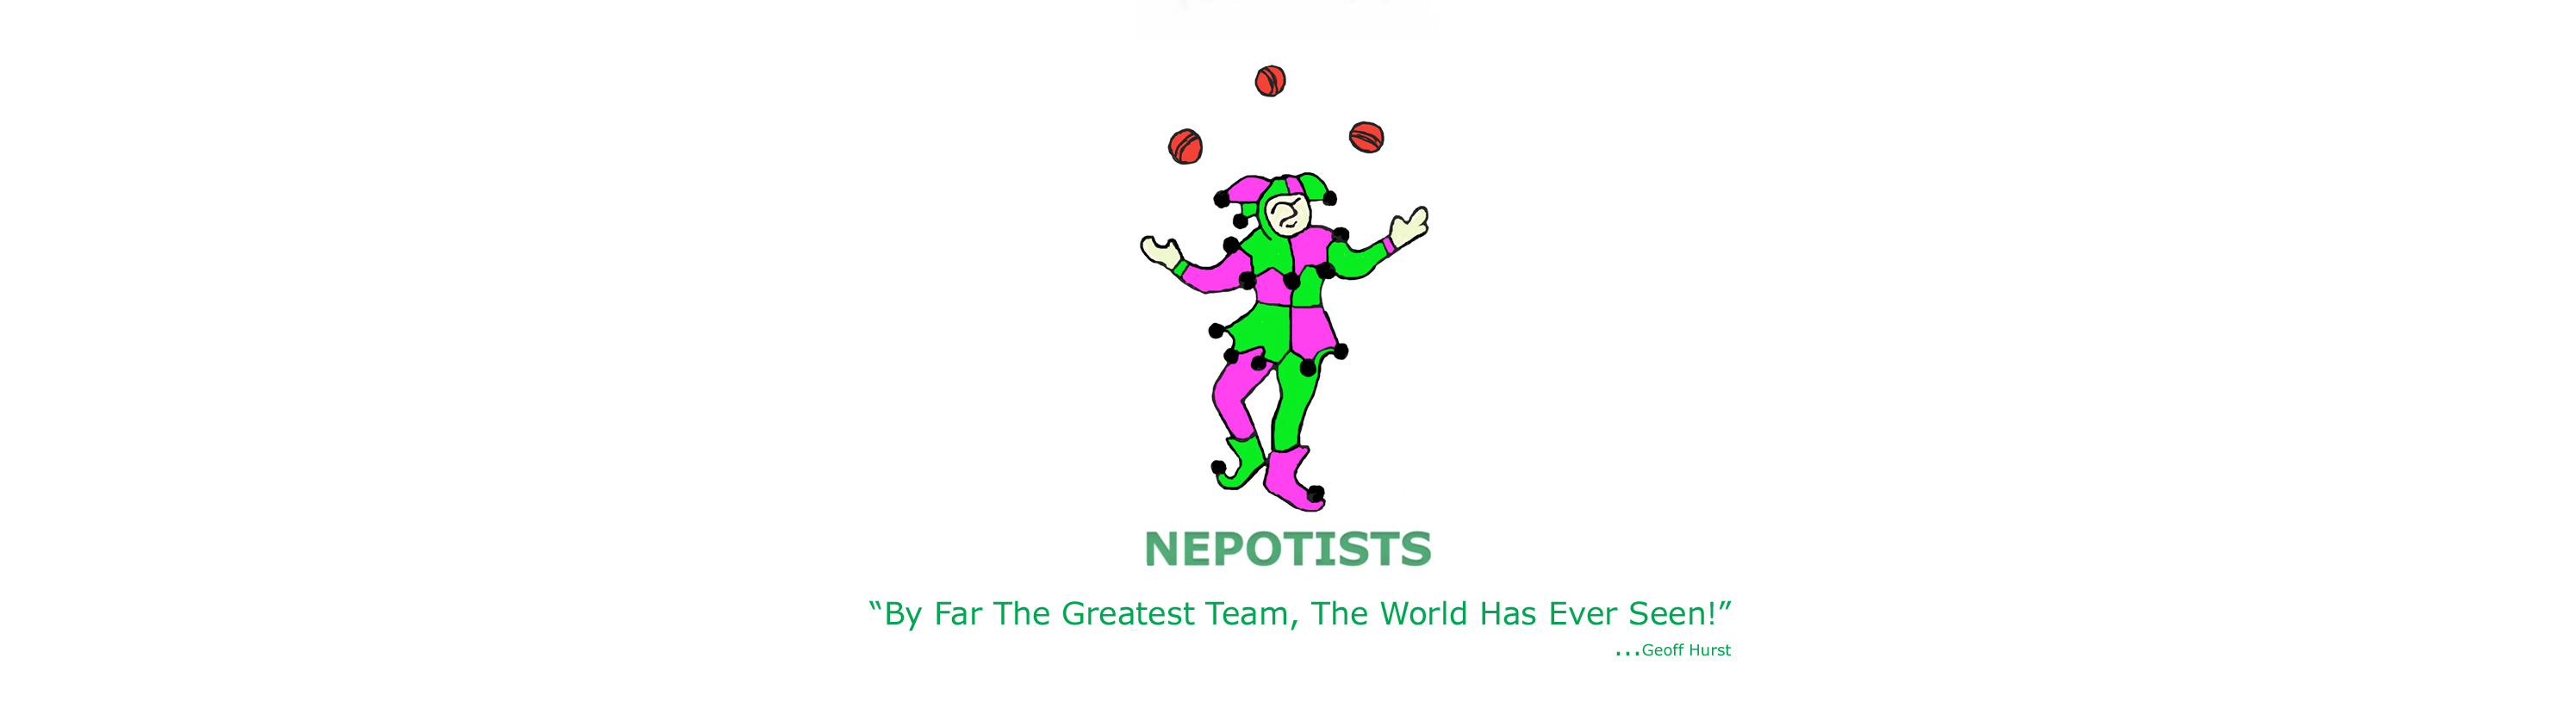 nepotists cc - trophy room